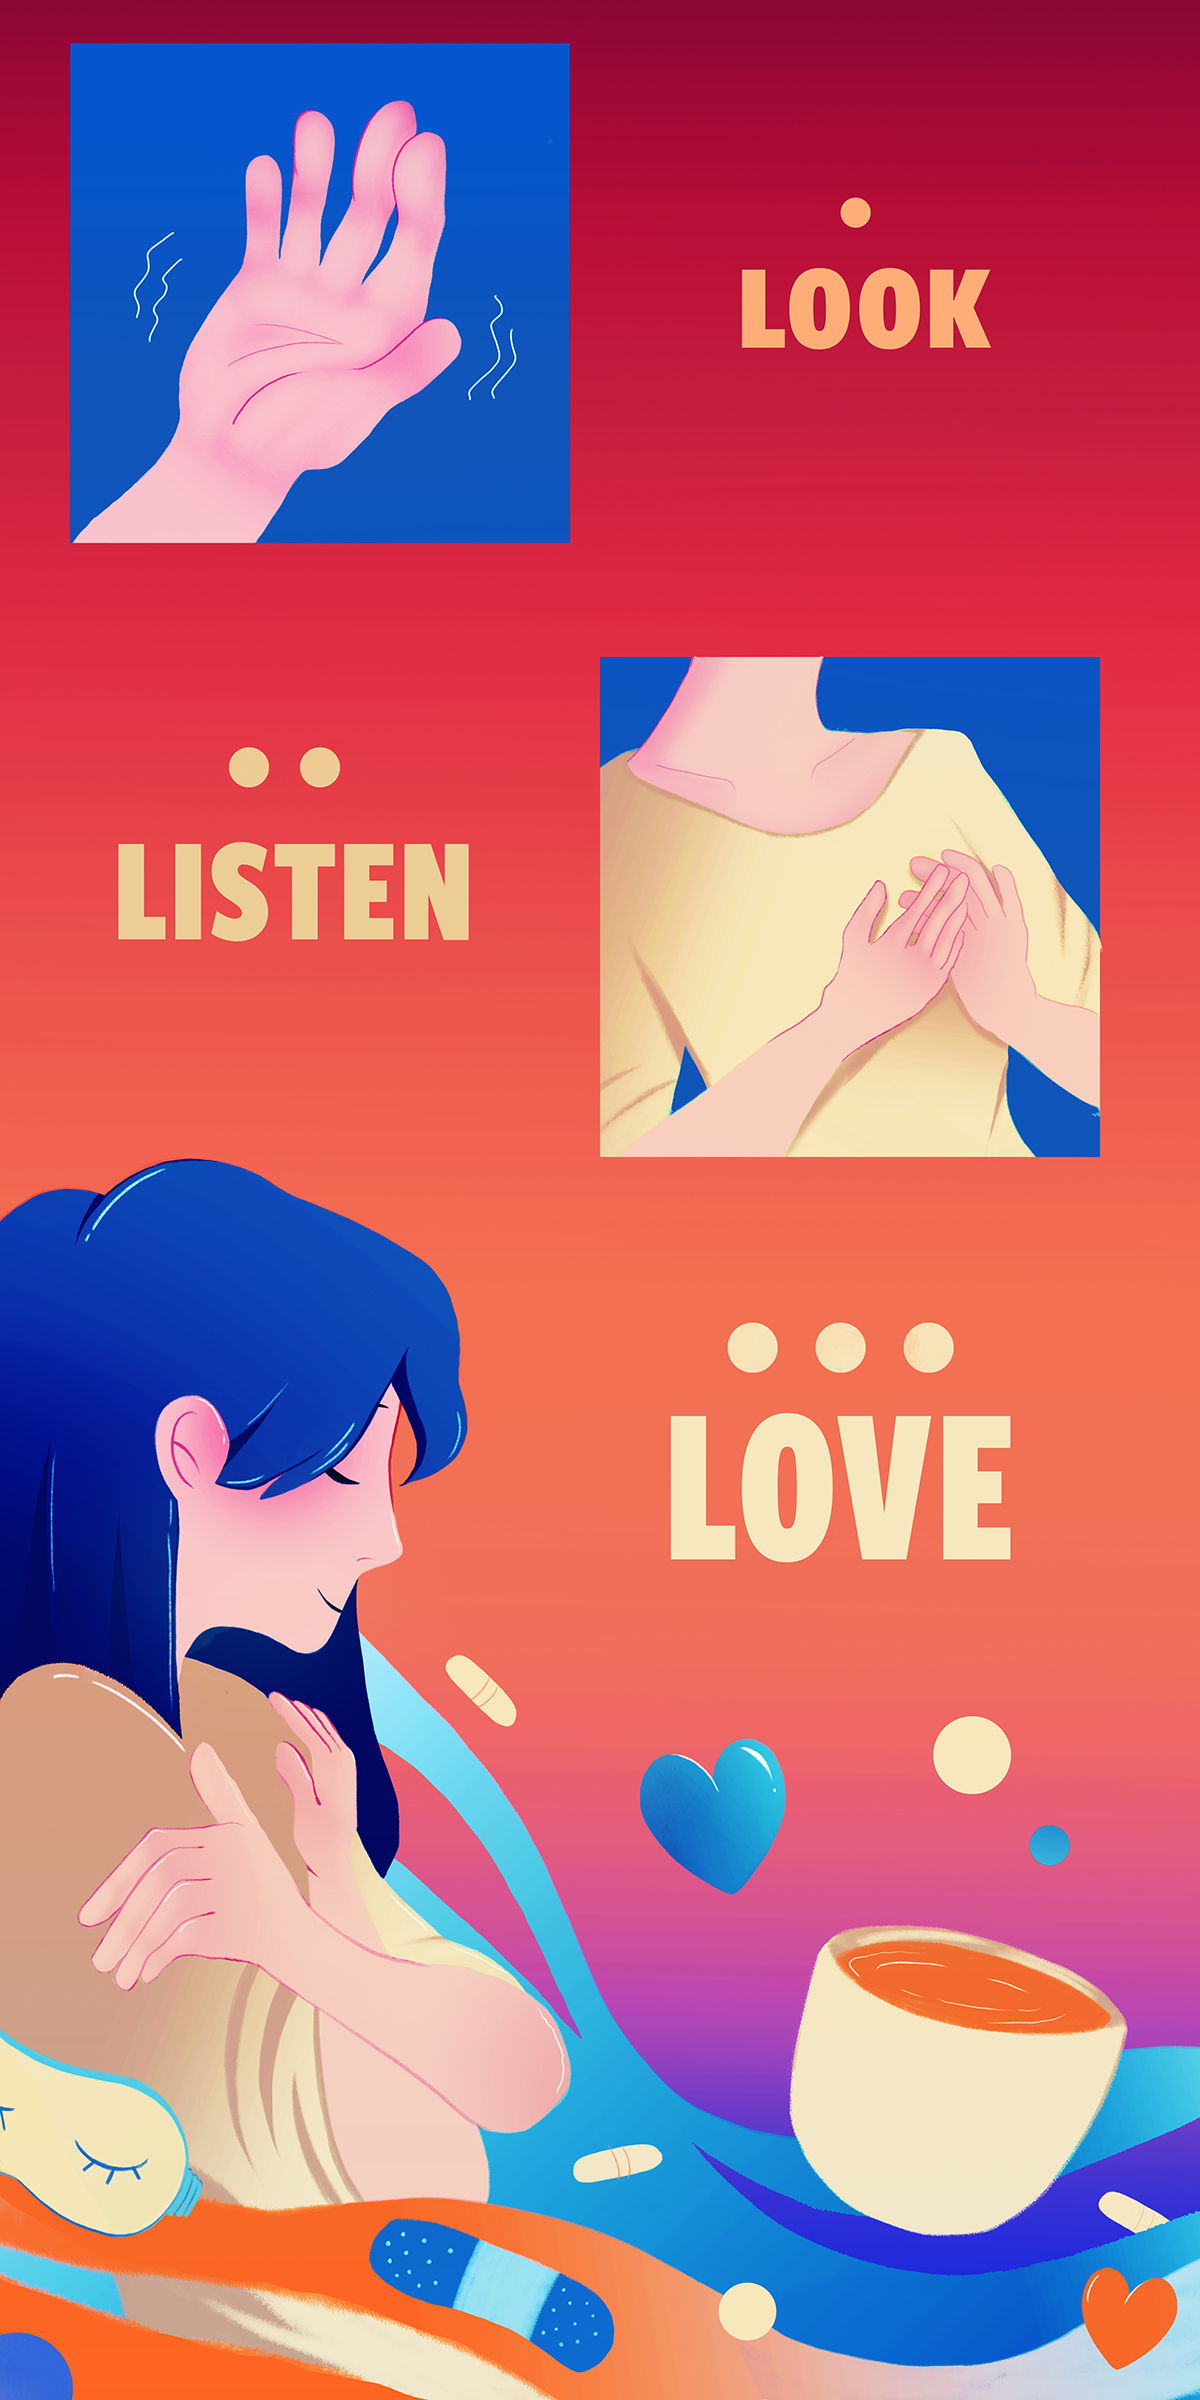 Digital illustration poster. Next to 'Look' theres a spot illustration of  a hand shaking, next to 'listen' shows a spot illustration of a persons two hands held up to their heart, next to 'Love' shows a woman embracing herself with a bowl of soup and other icons denoting healing